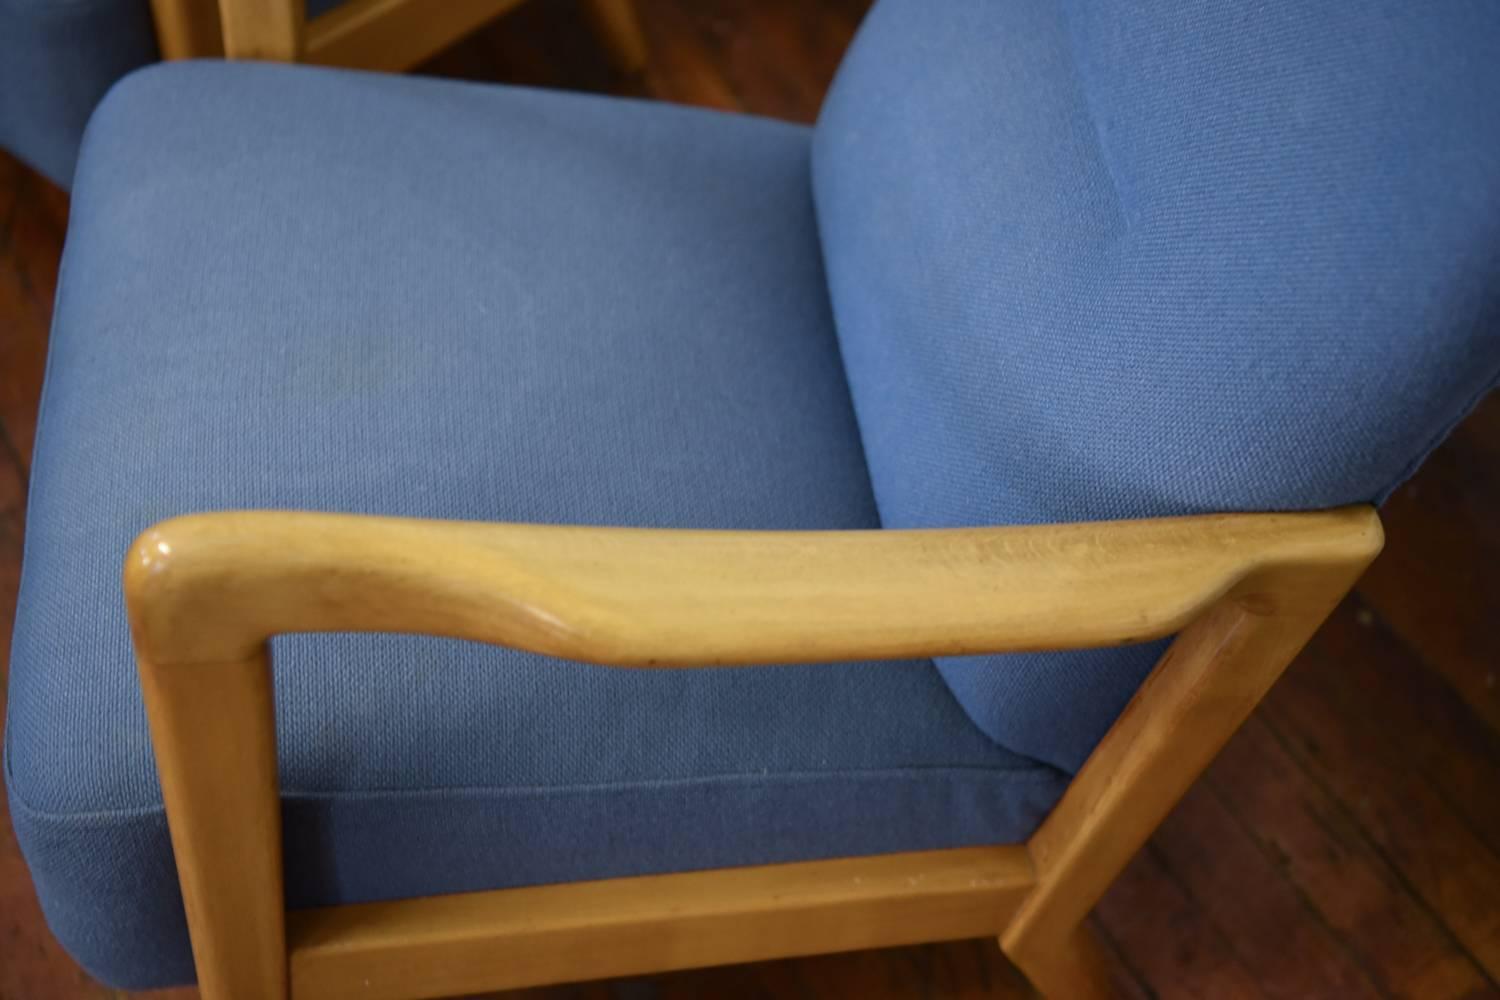 These Classic open-arm lounge chairs designed by Søren Hansen for Fritz Hansen epitomize their penchant for wing back chairs, and feature beautiful blue upholstery, which contrasts pleasantly to the warm beech frame. Designed for comfort and style,